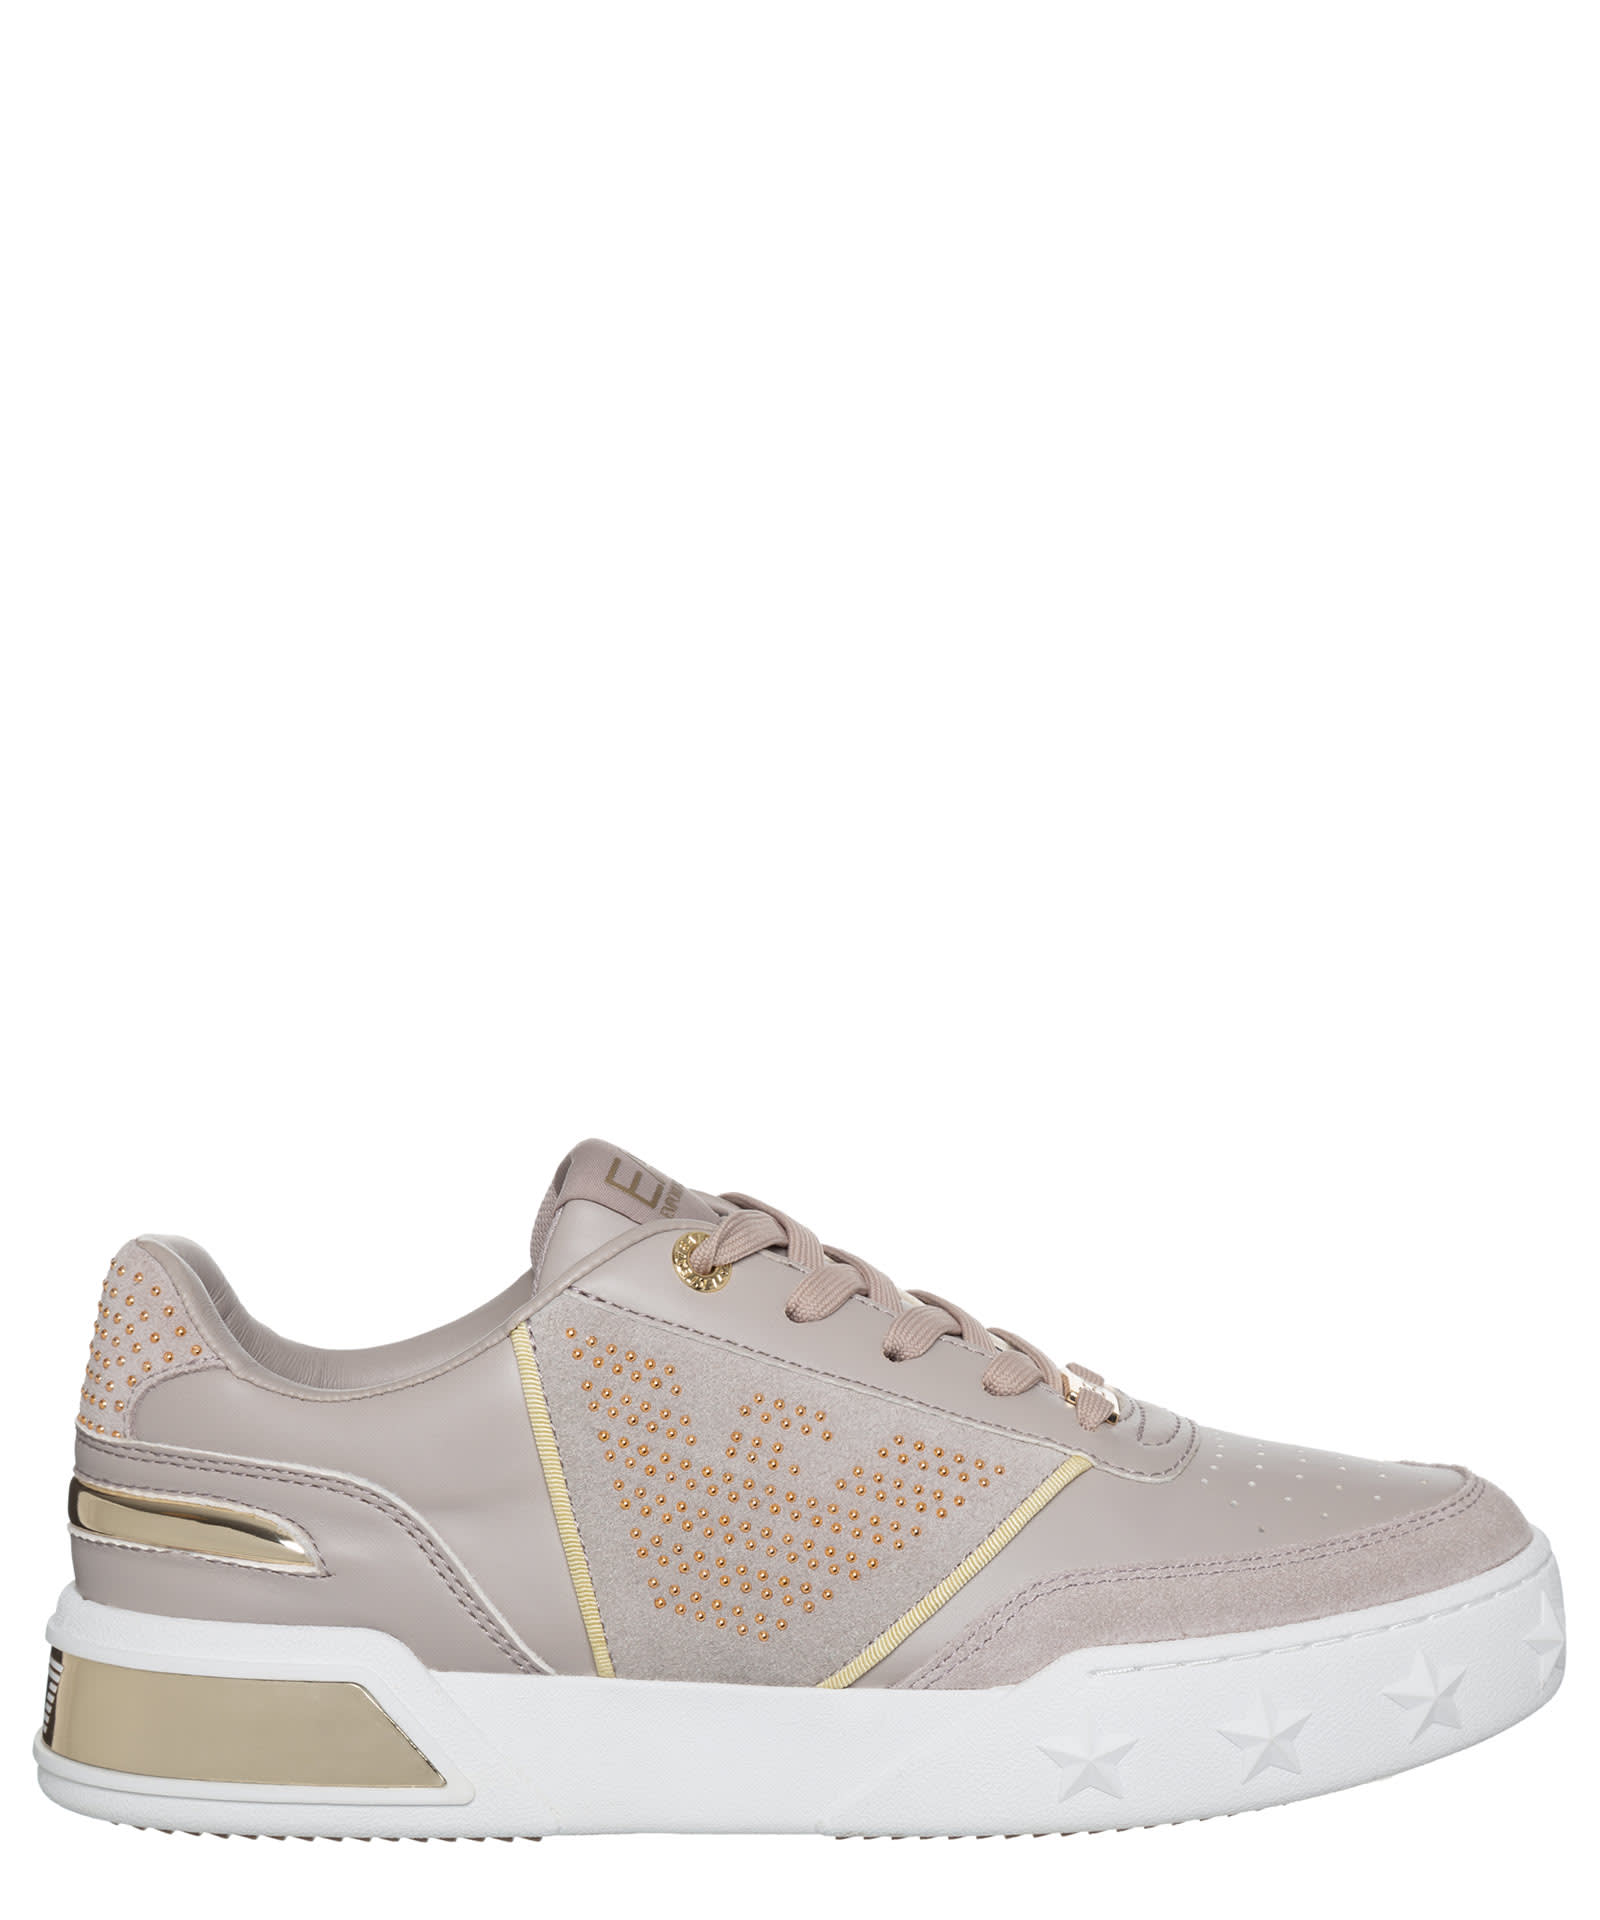 EA7 GOLD STAR GOLD STAR SNEAKERS